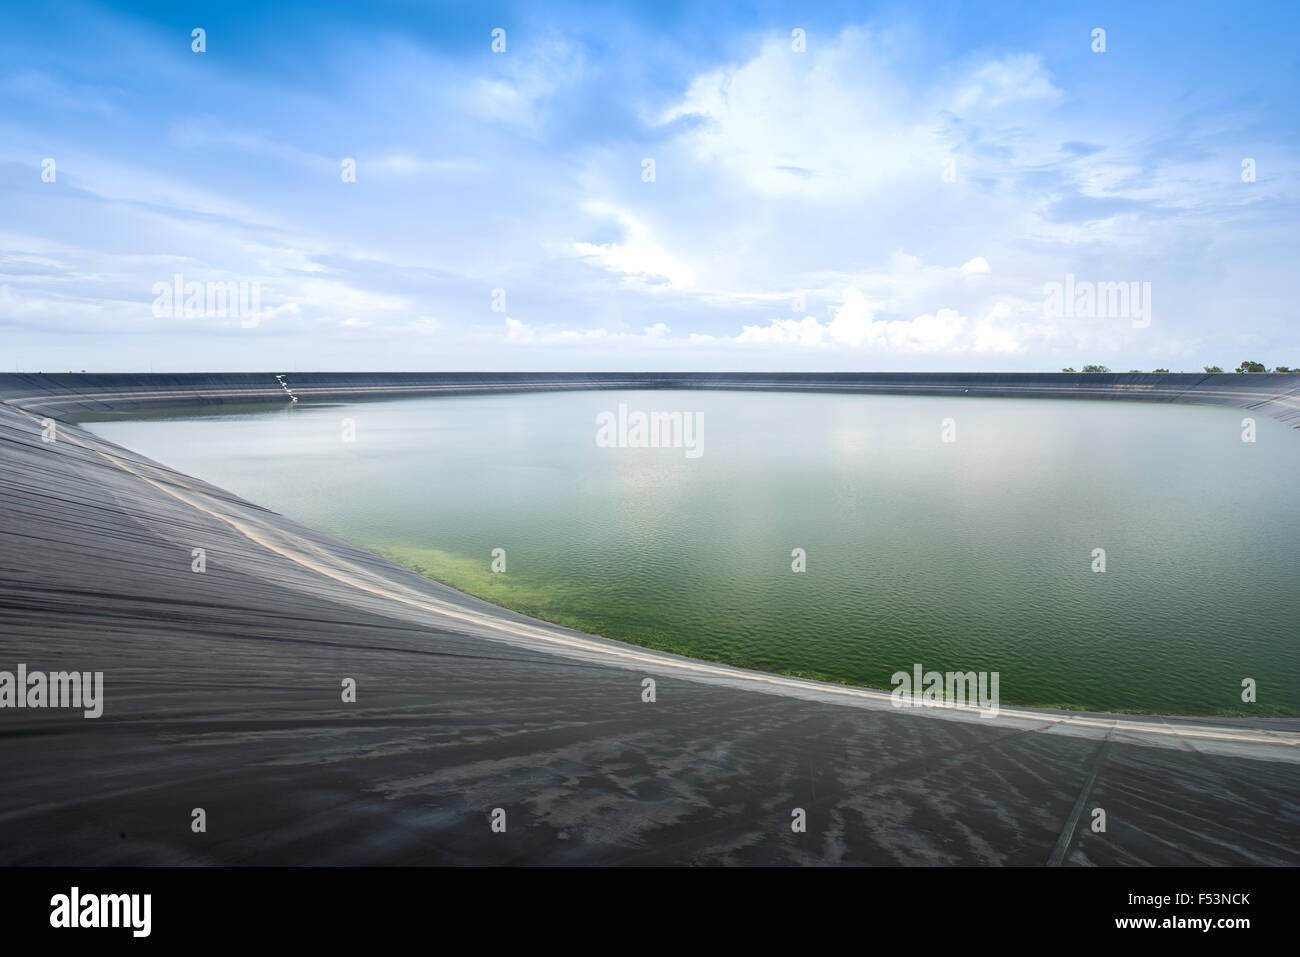 Lam Takong reservoir (water reservoir with plastic liner), Nakhon Ratchasima, Thailand Stock Photo